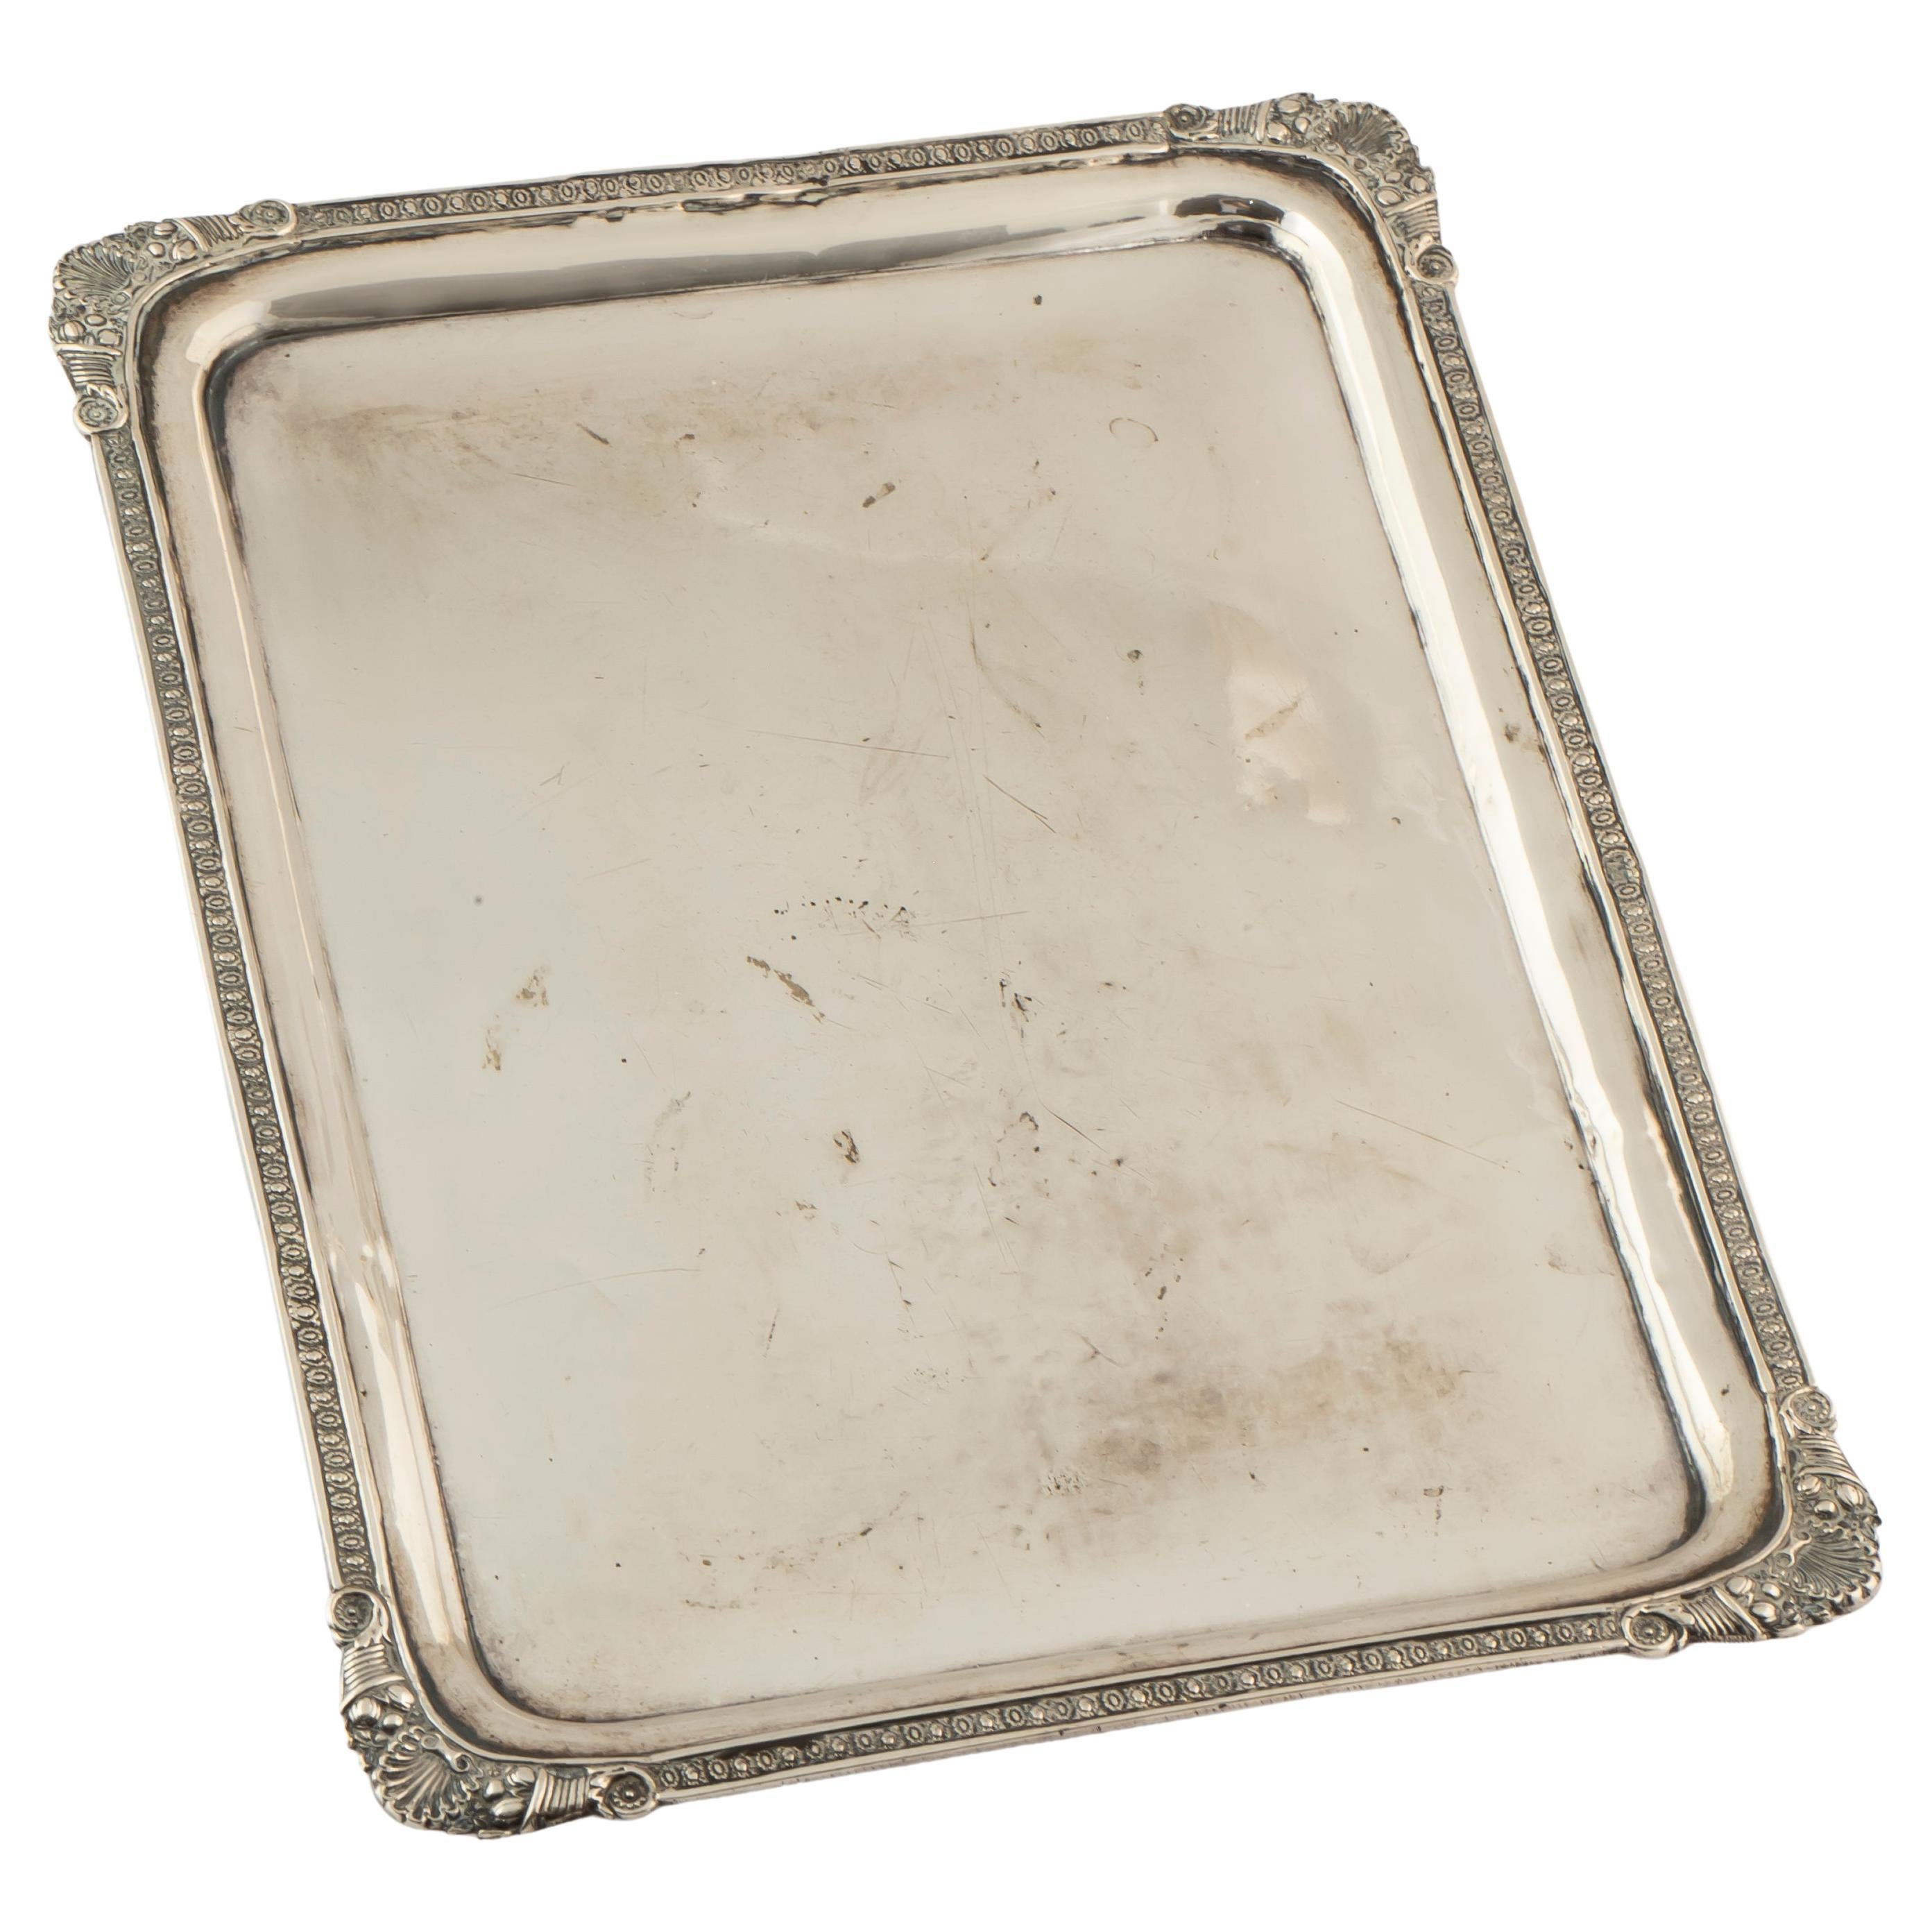 Russian Imperial-era Silver Letter Tray by Timofeev, Moscow, 1835